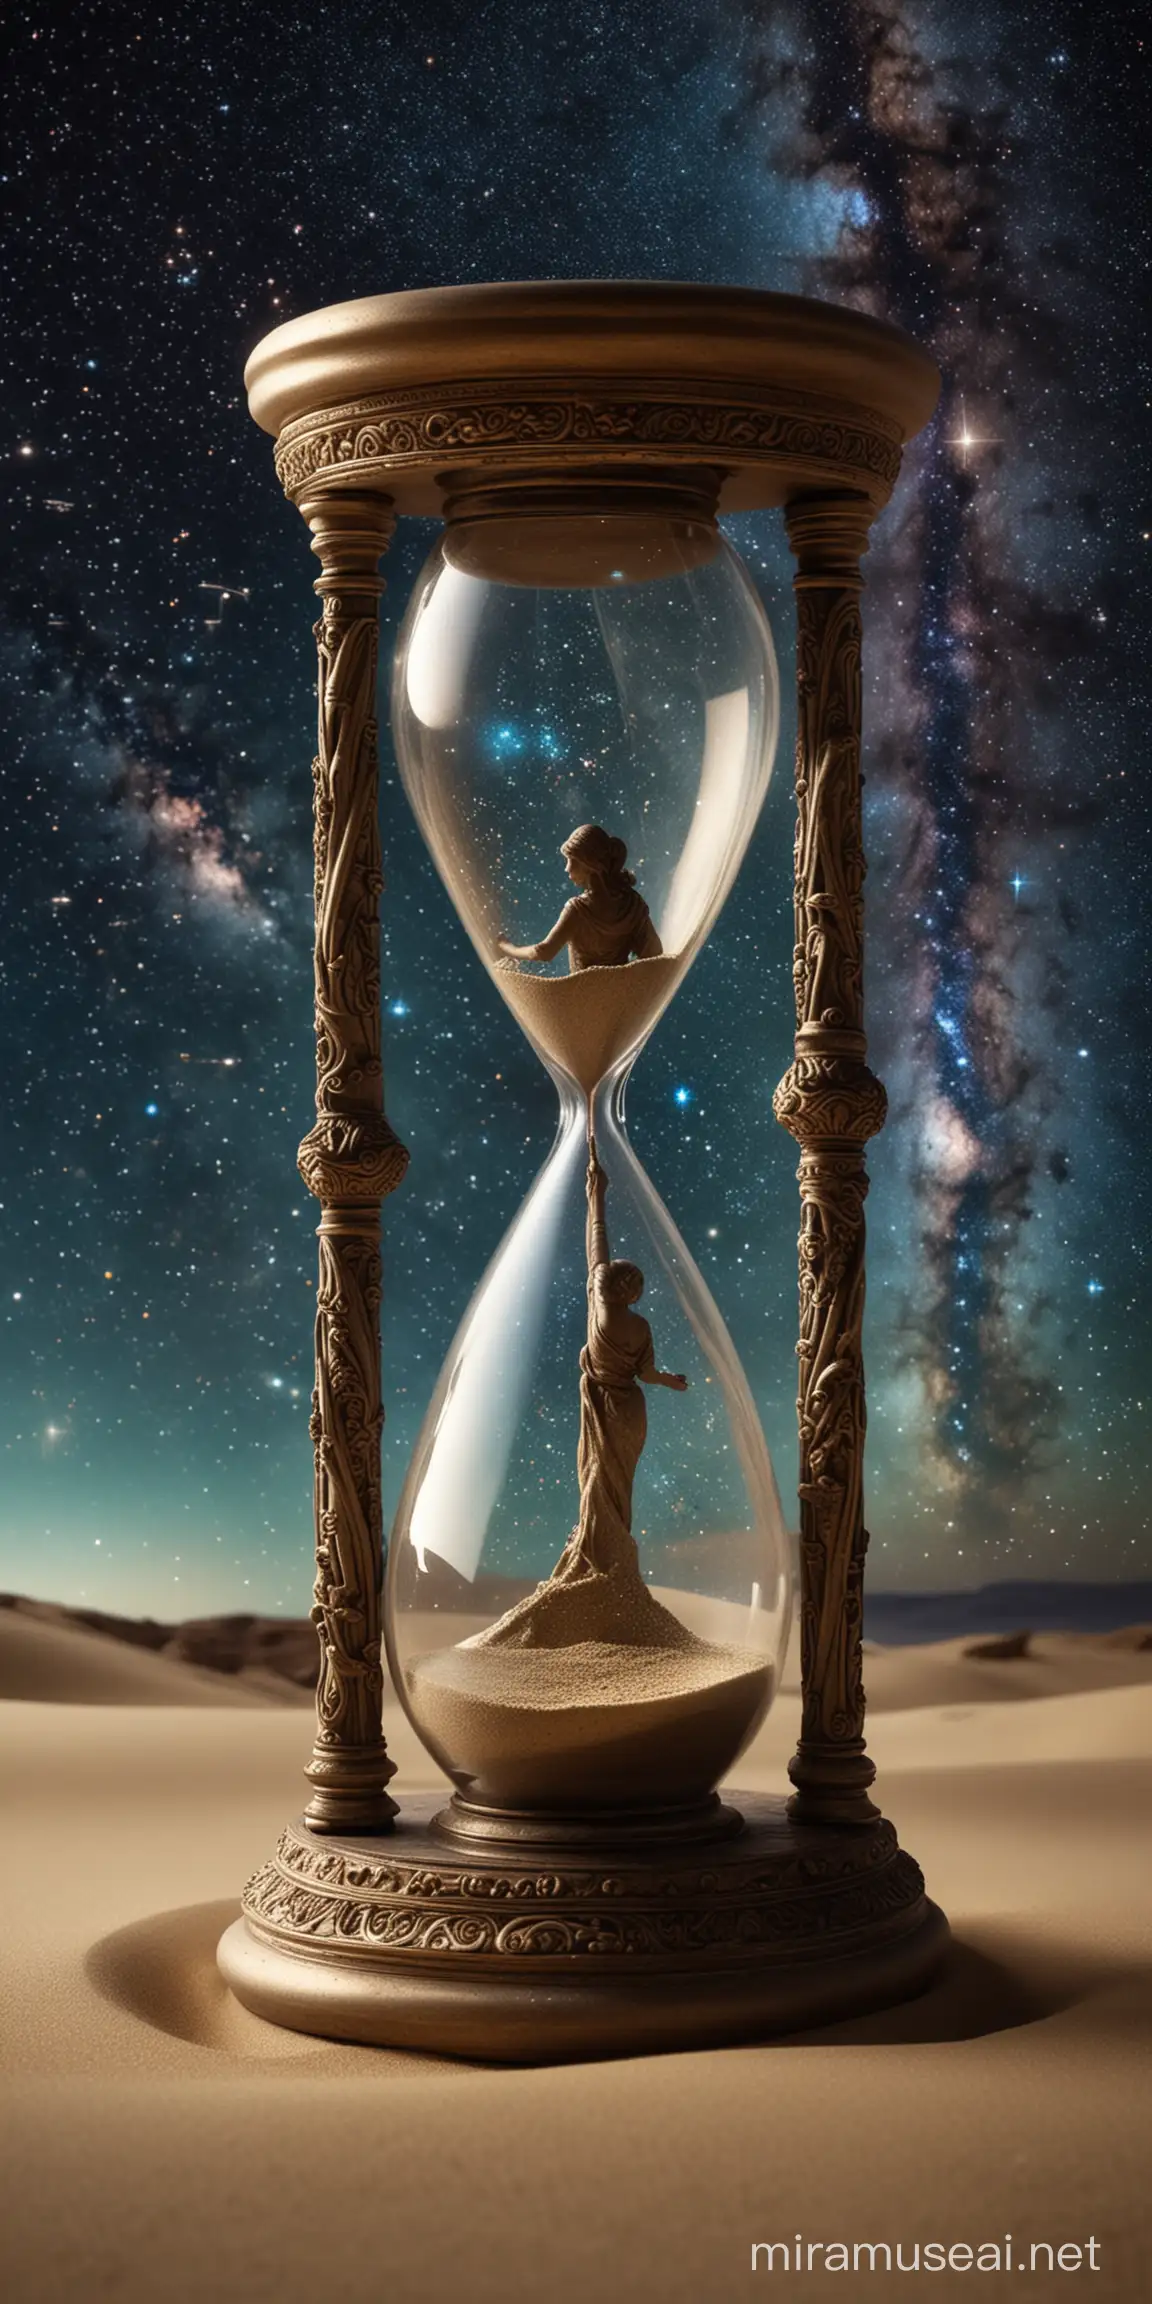 In an ancient chamber, an ornate hourglass defies convention, its glass filled with swirling galaxies instead of sand. A figure, draped in stardust, reaches out to touch the cosmic timepiece, as if beckoning to rewrite the stars.